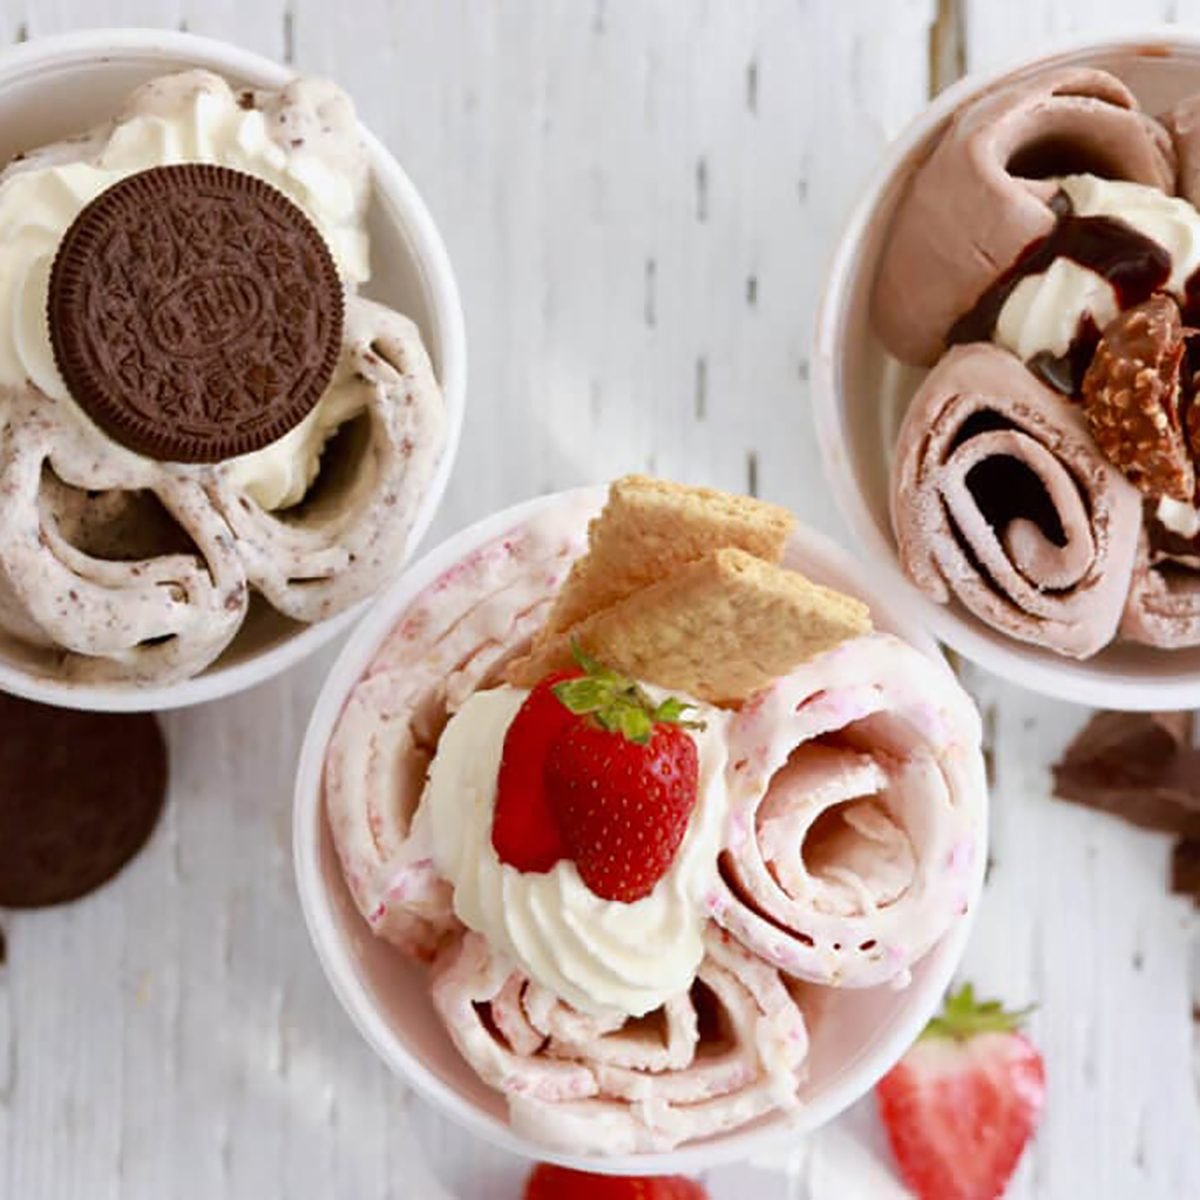 Choose Your Own Boozy Ice Cream - 4 Pints